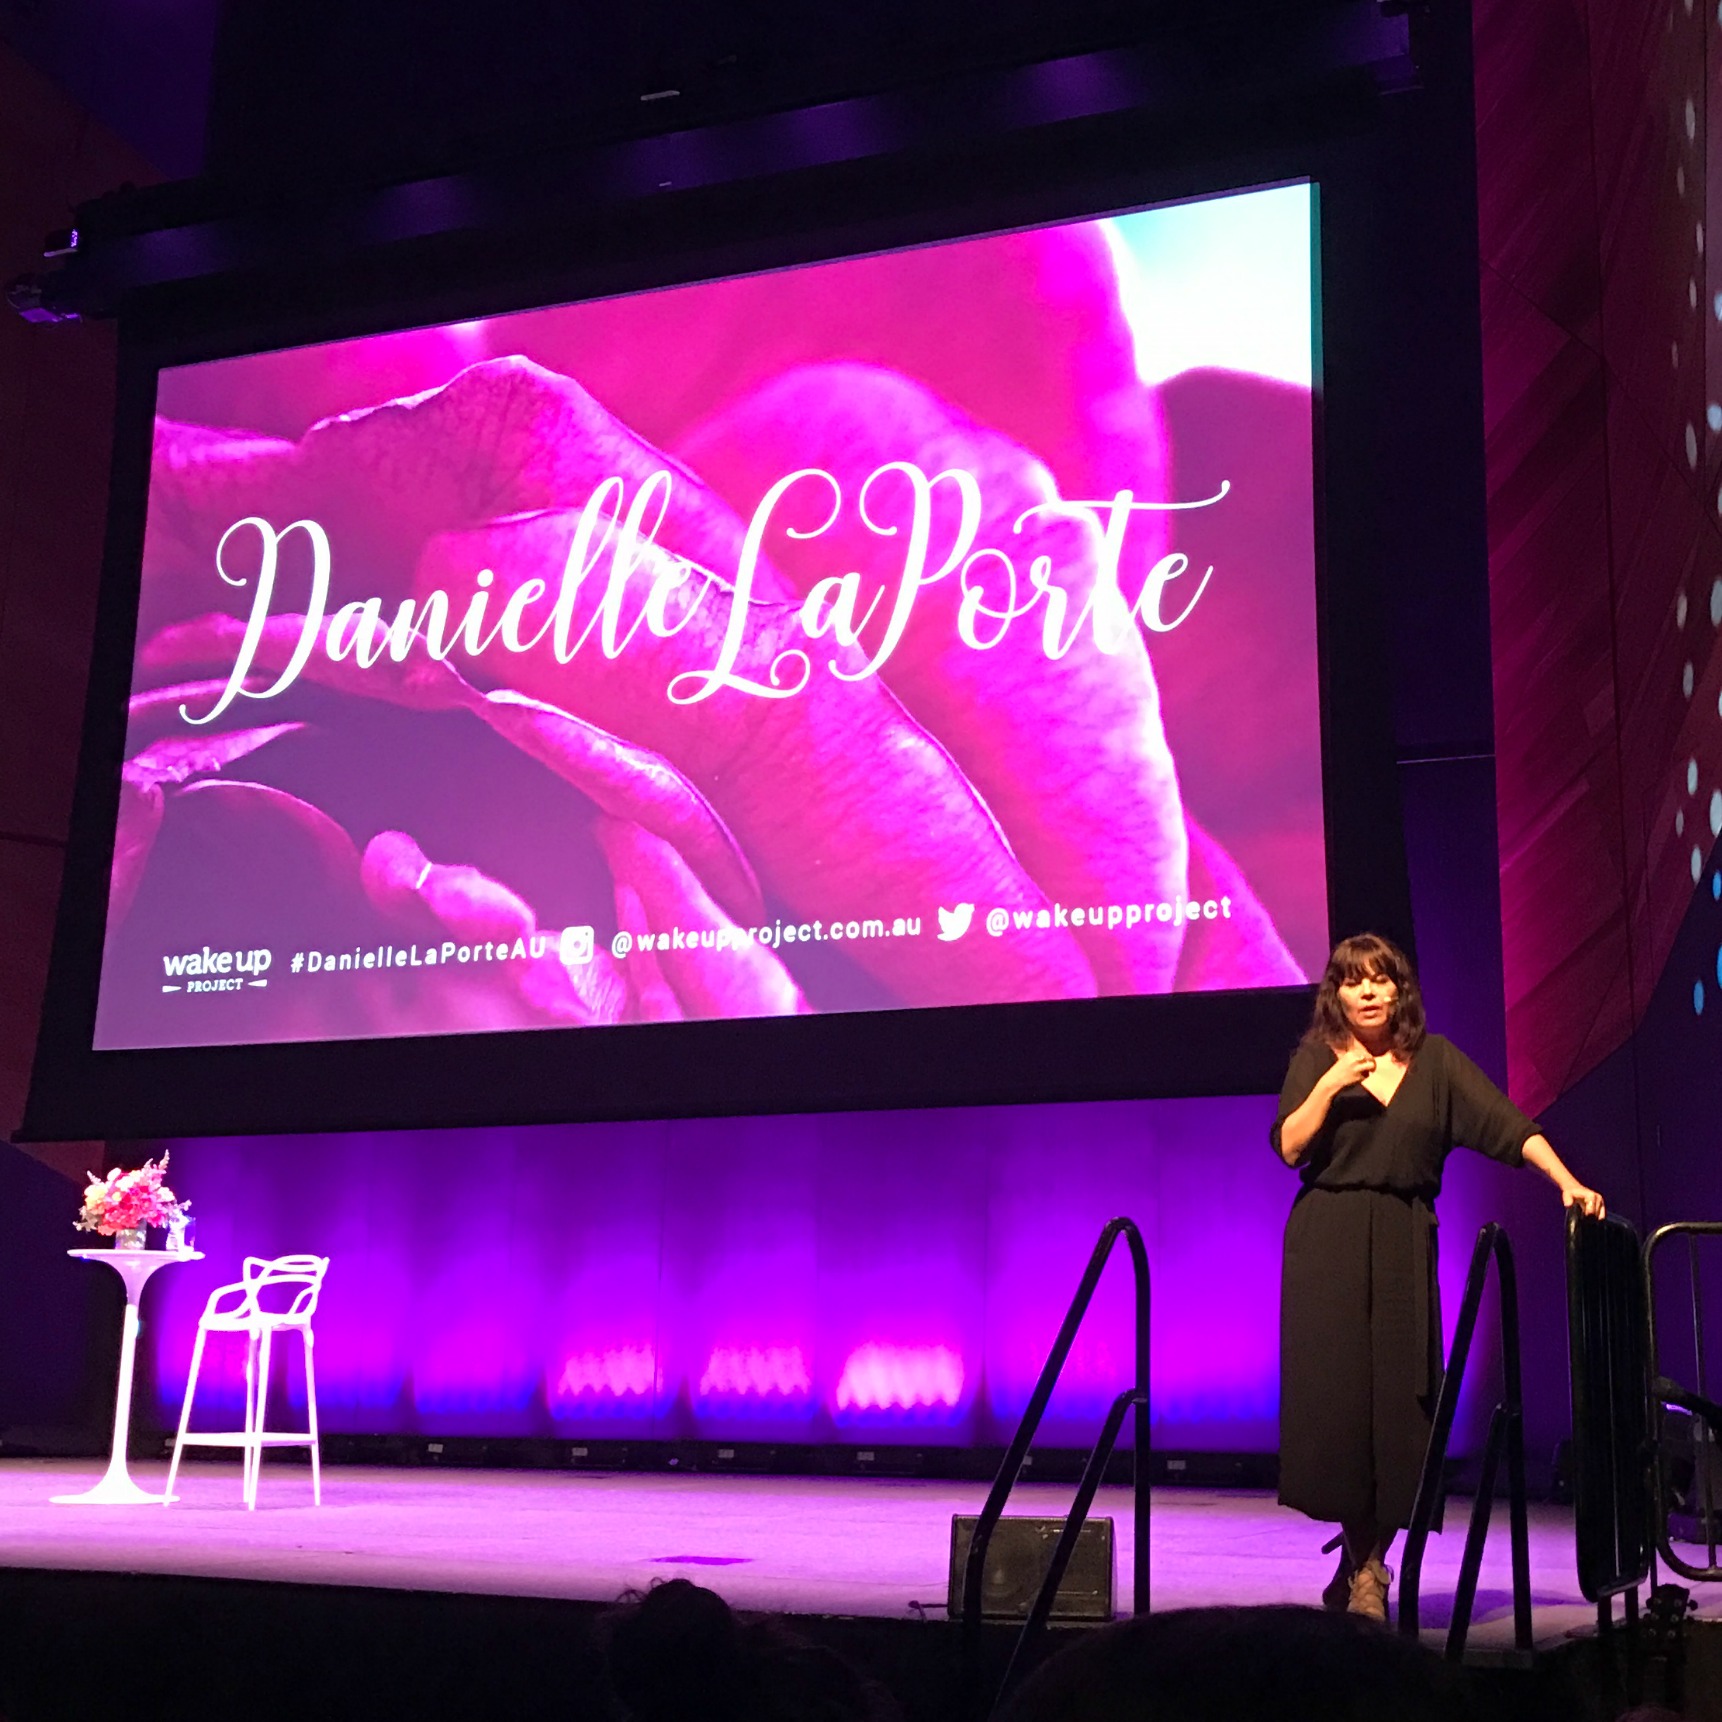 "The best self-help is self-compassion.” Here are 16 truthbombs from Danielle Laporte from the Choose To Shine event that impacted me the most… https://oneinfinitelife.com/truthbombs-from-danielle-laporte/